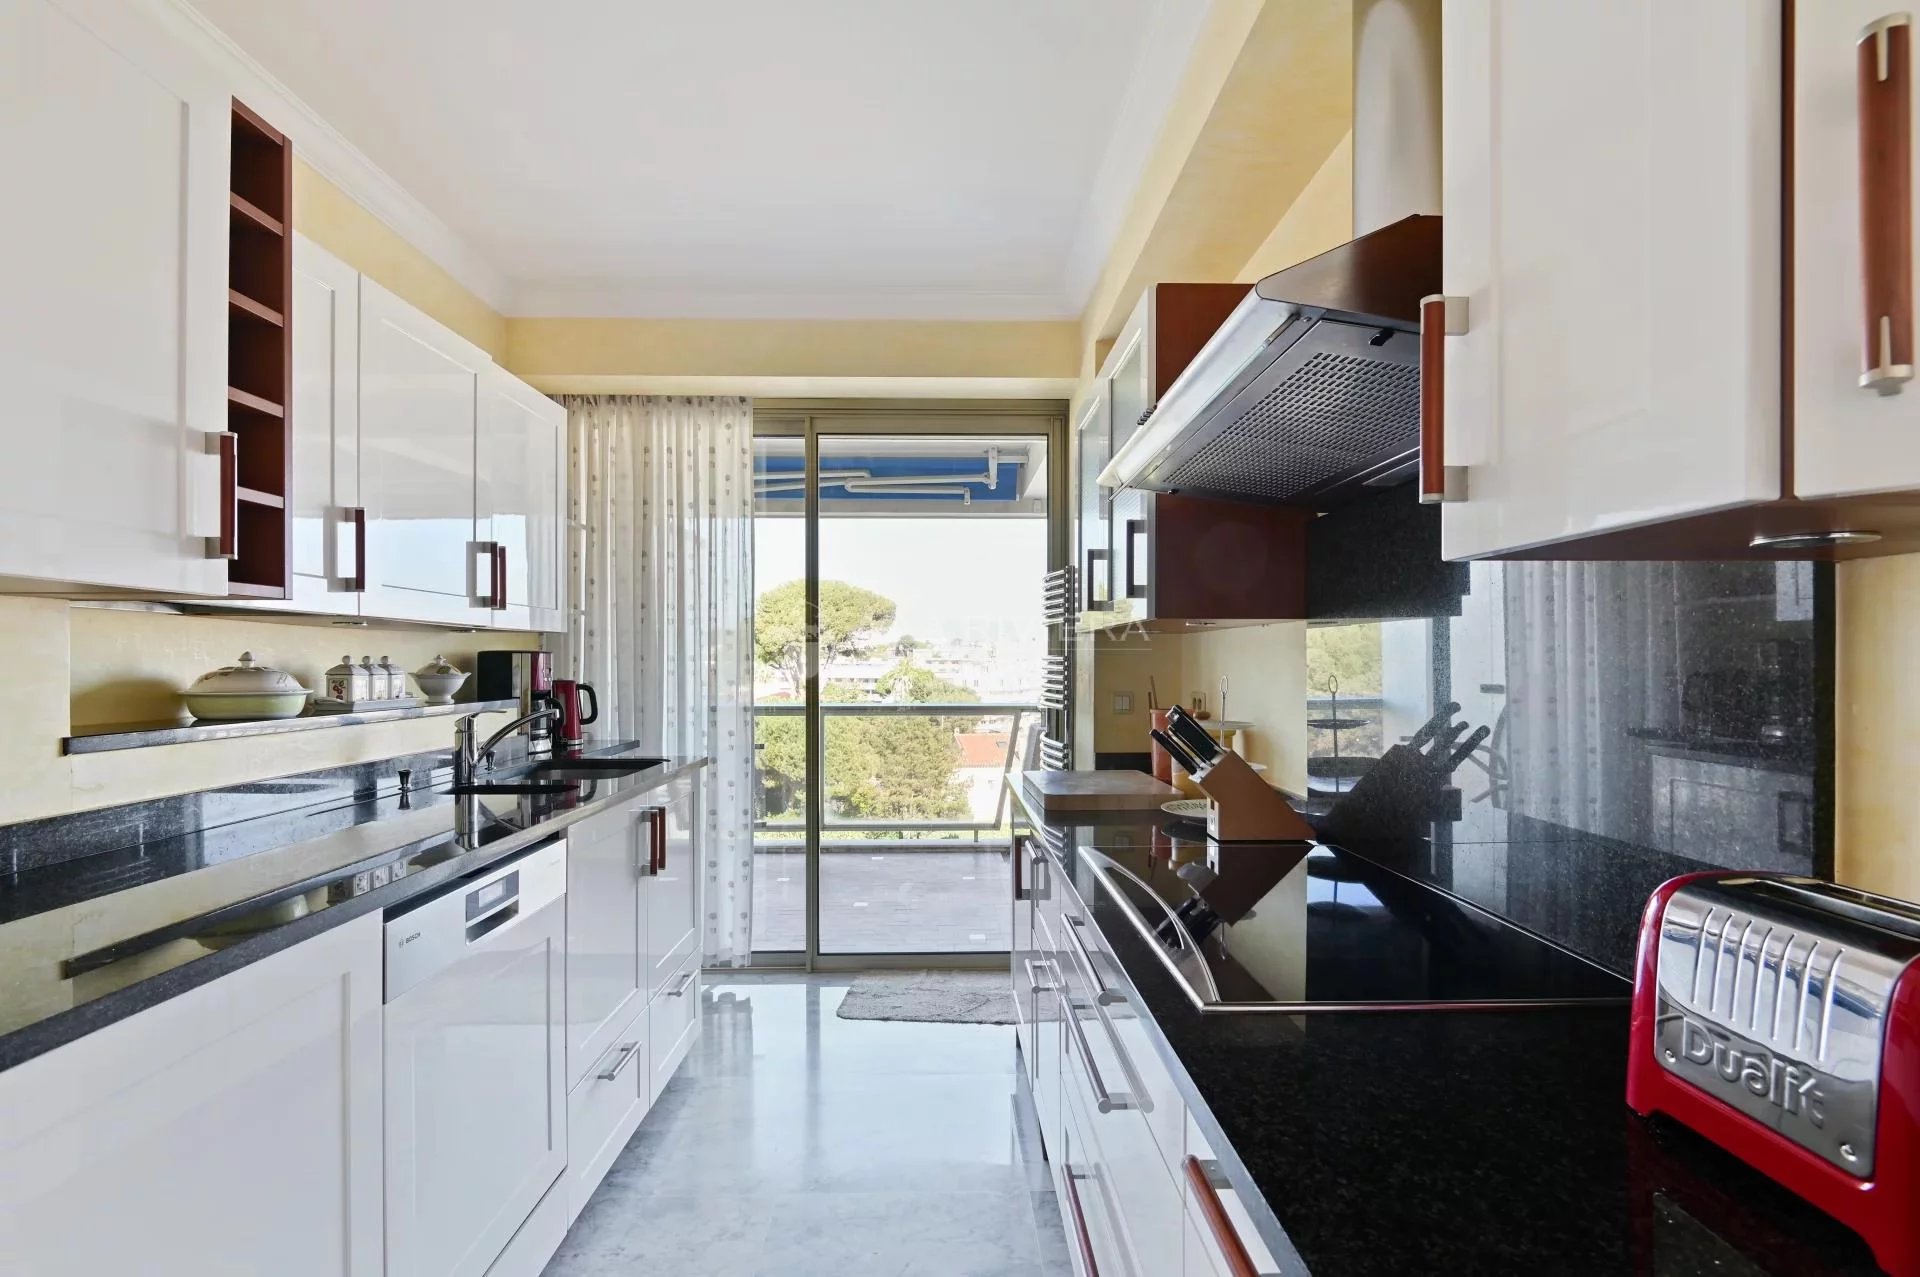 SOLD - ANTIBES Ilette - Joint Sole Agent - 3 bedroom high floor apartment with sea view. Garage, pool